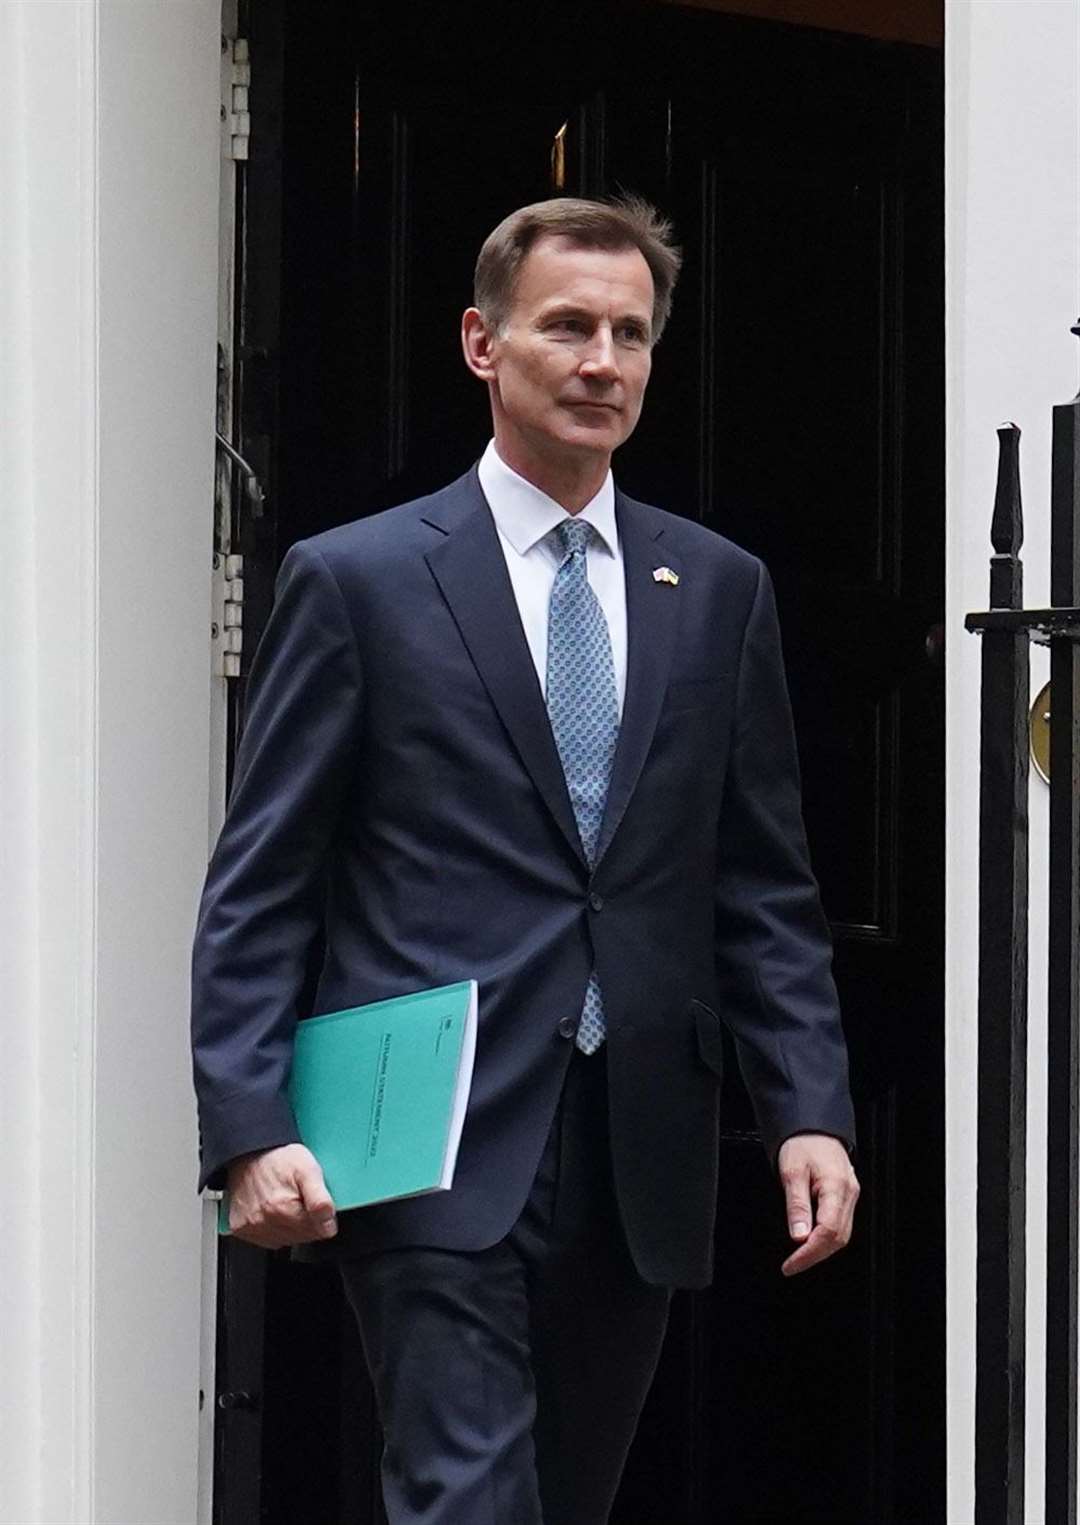 Chancellor of the Exchequer Jeremy Hunt leaves 11 Downing Street for the House of Commons to deliver his autumn statement.